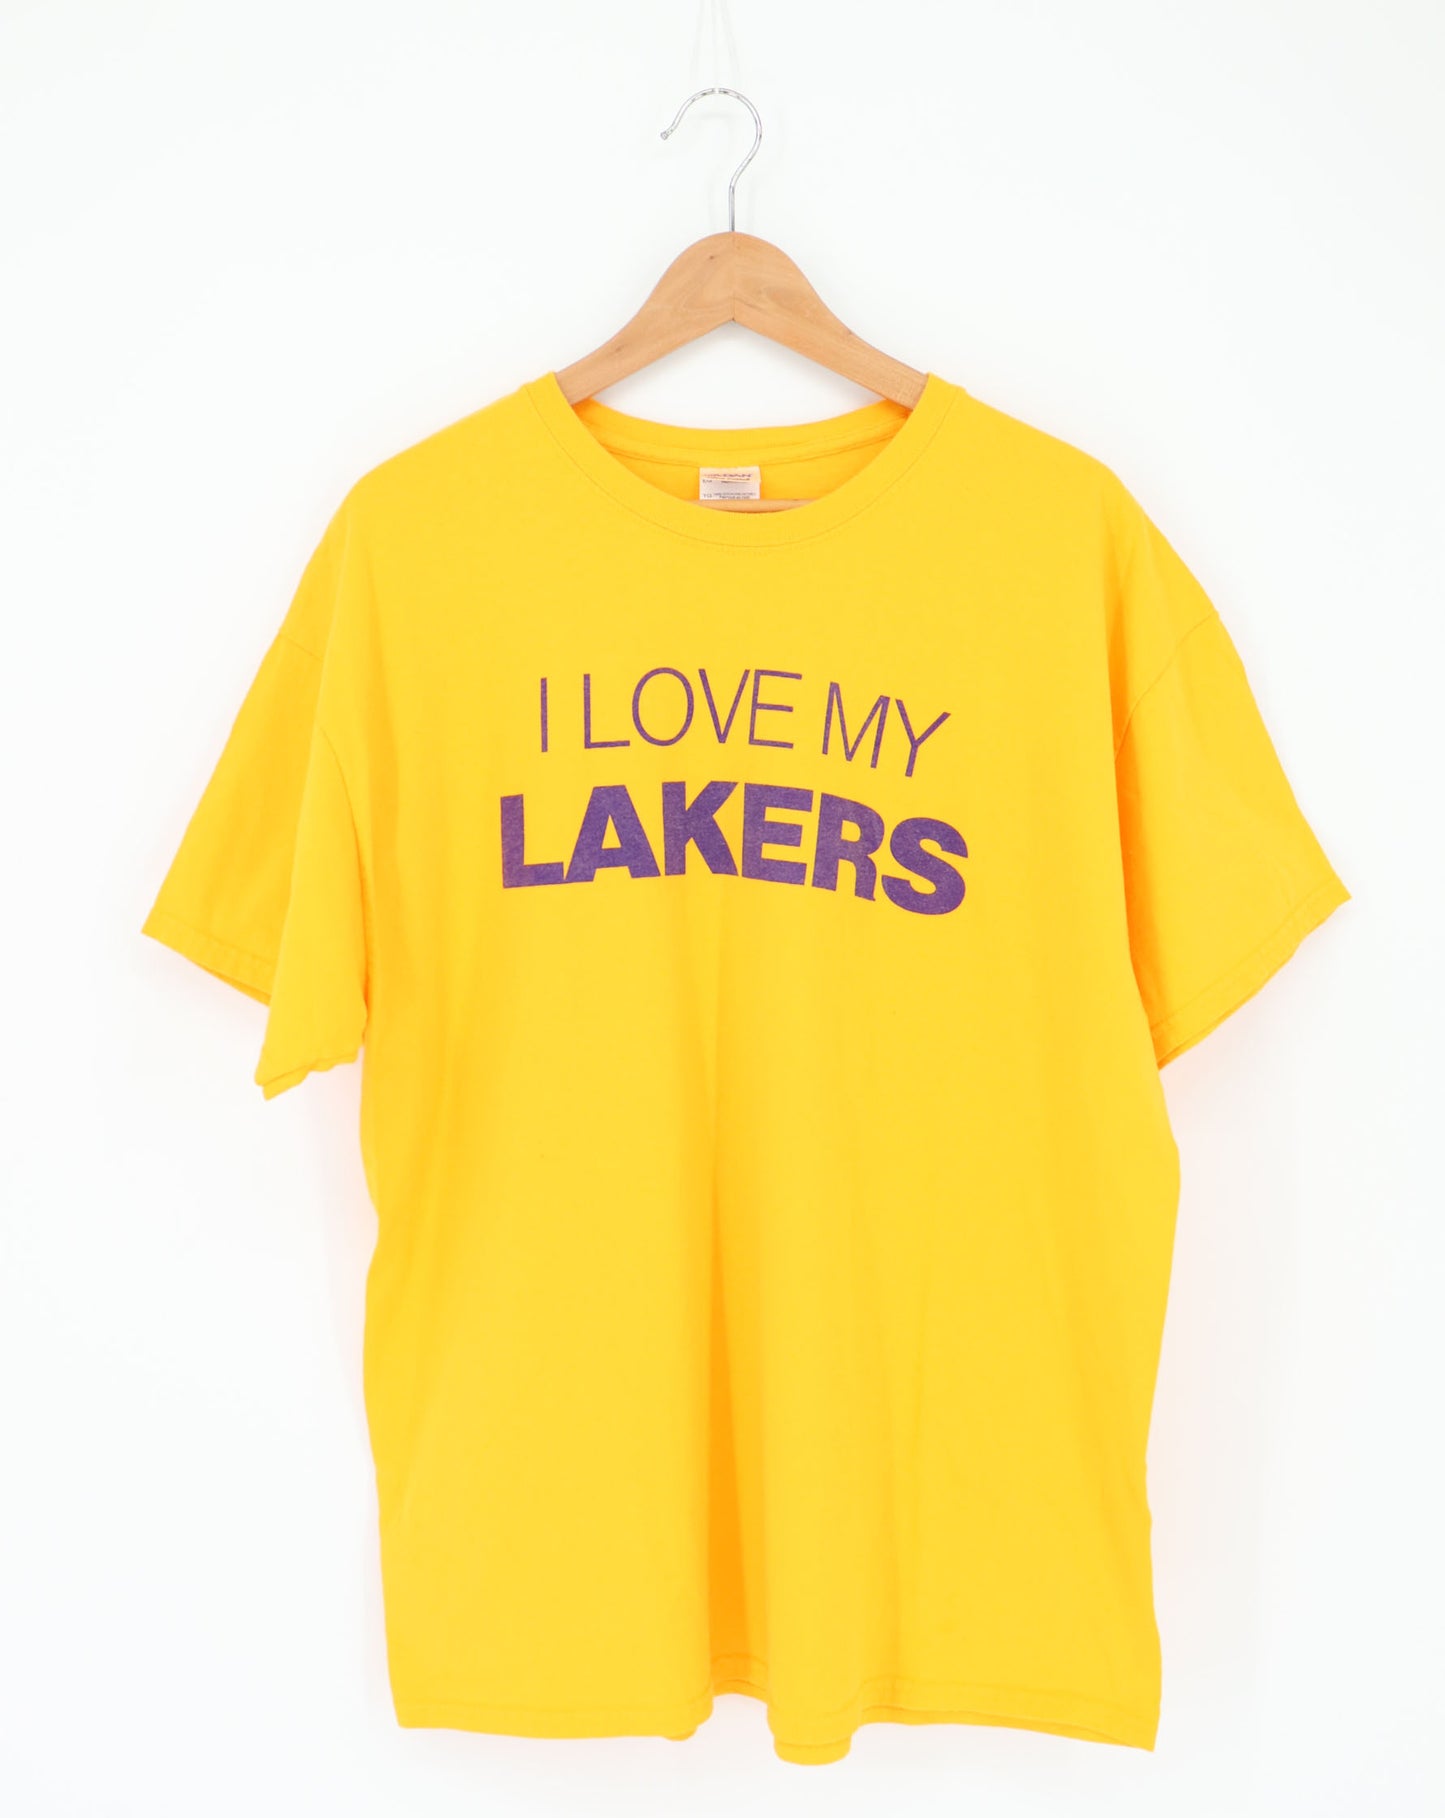 I LOVE MY LAKERS